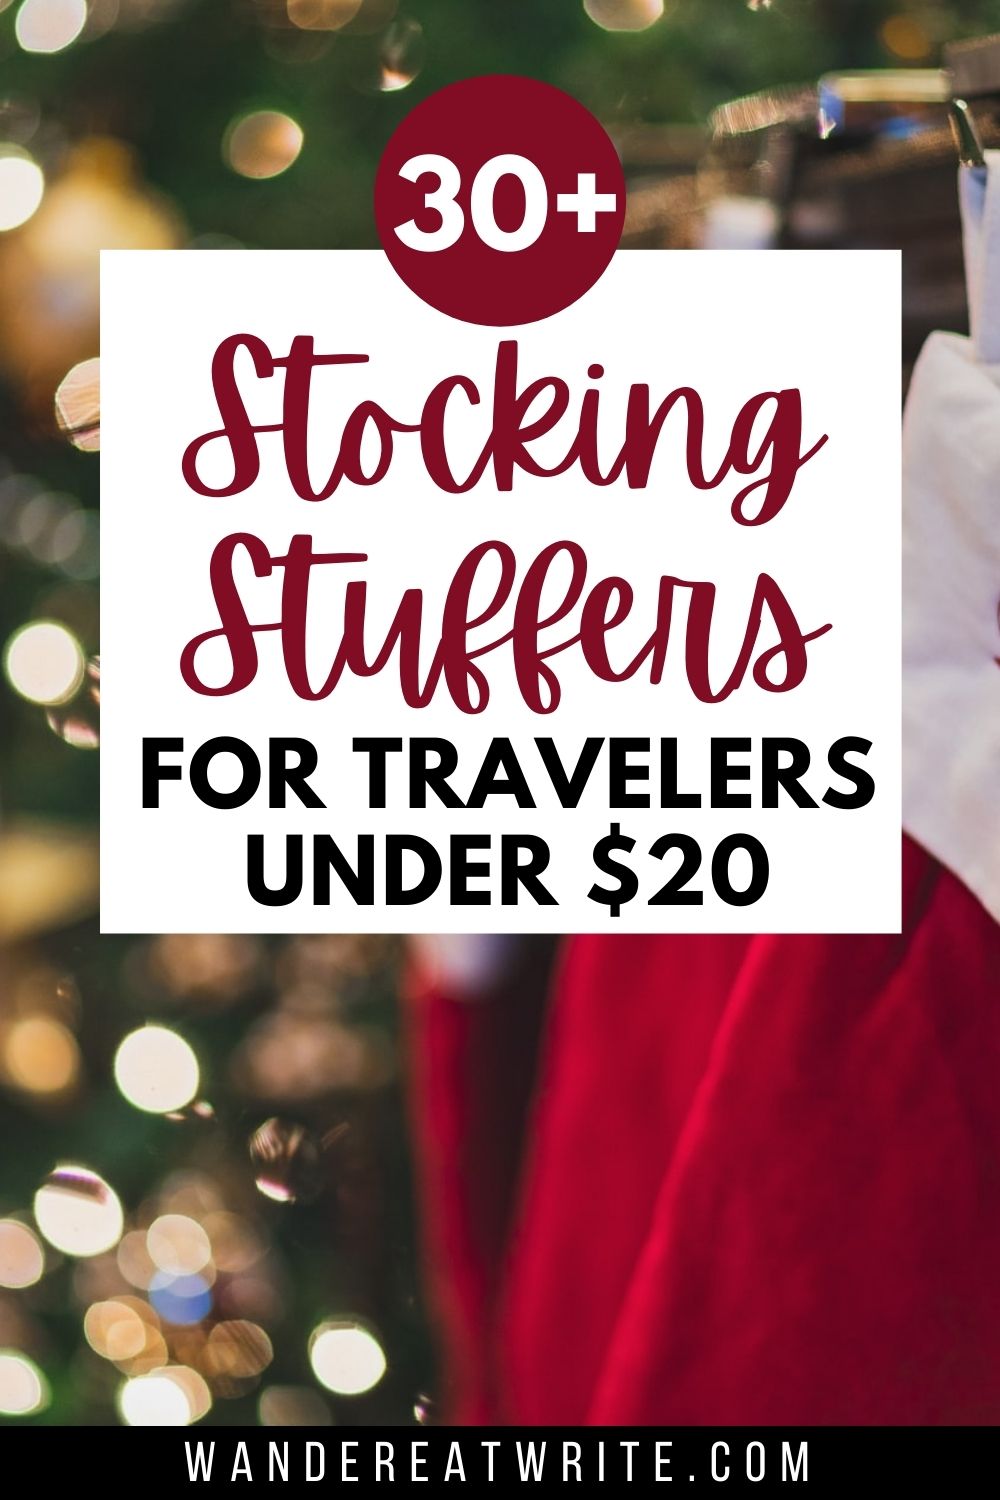 60+ Perfect Stocking Stuffer Ideas - And Here We Are